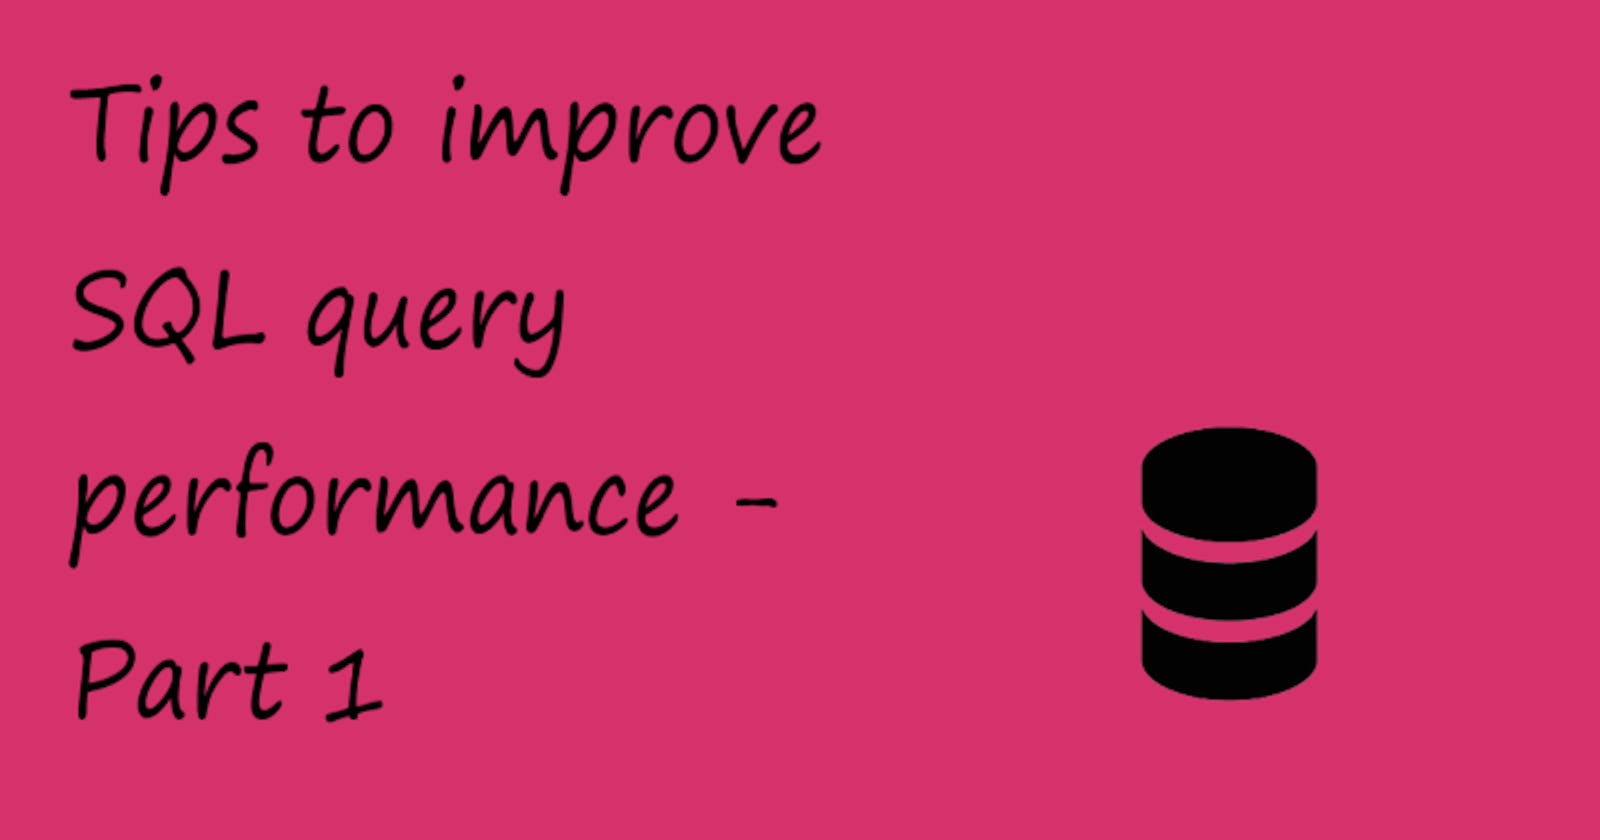 Tips to improve SQL query performance - Part 1